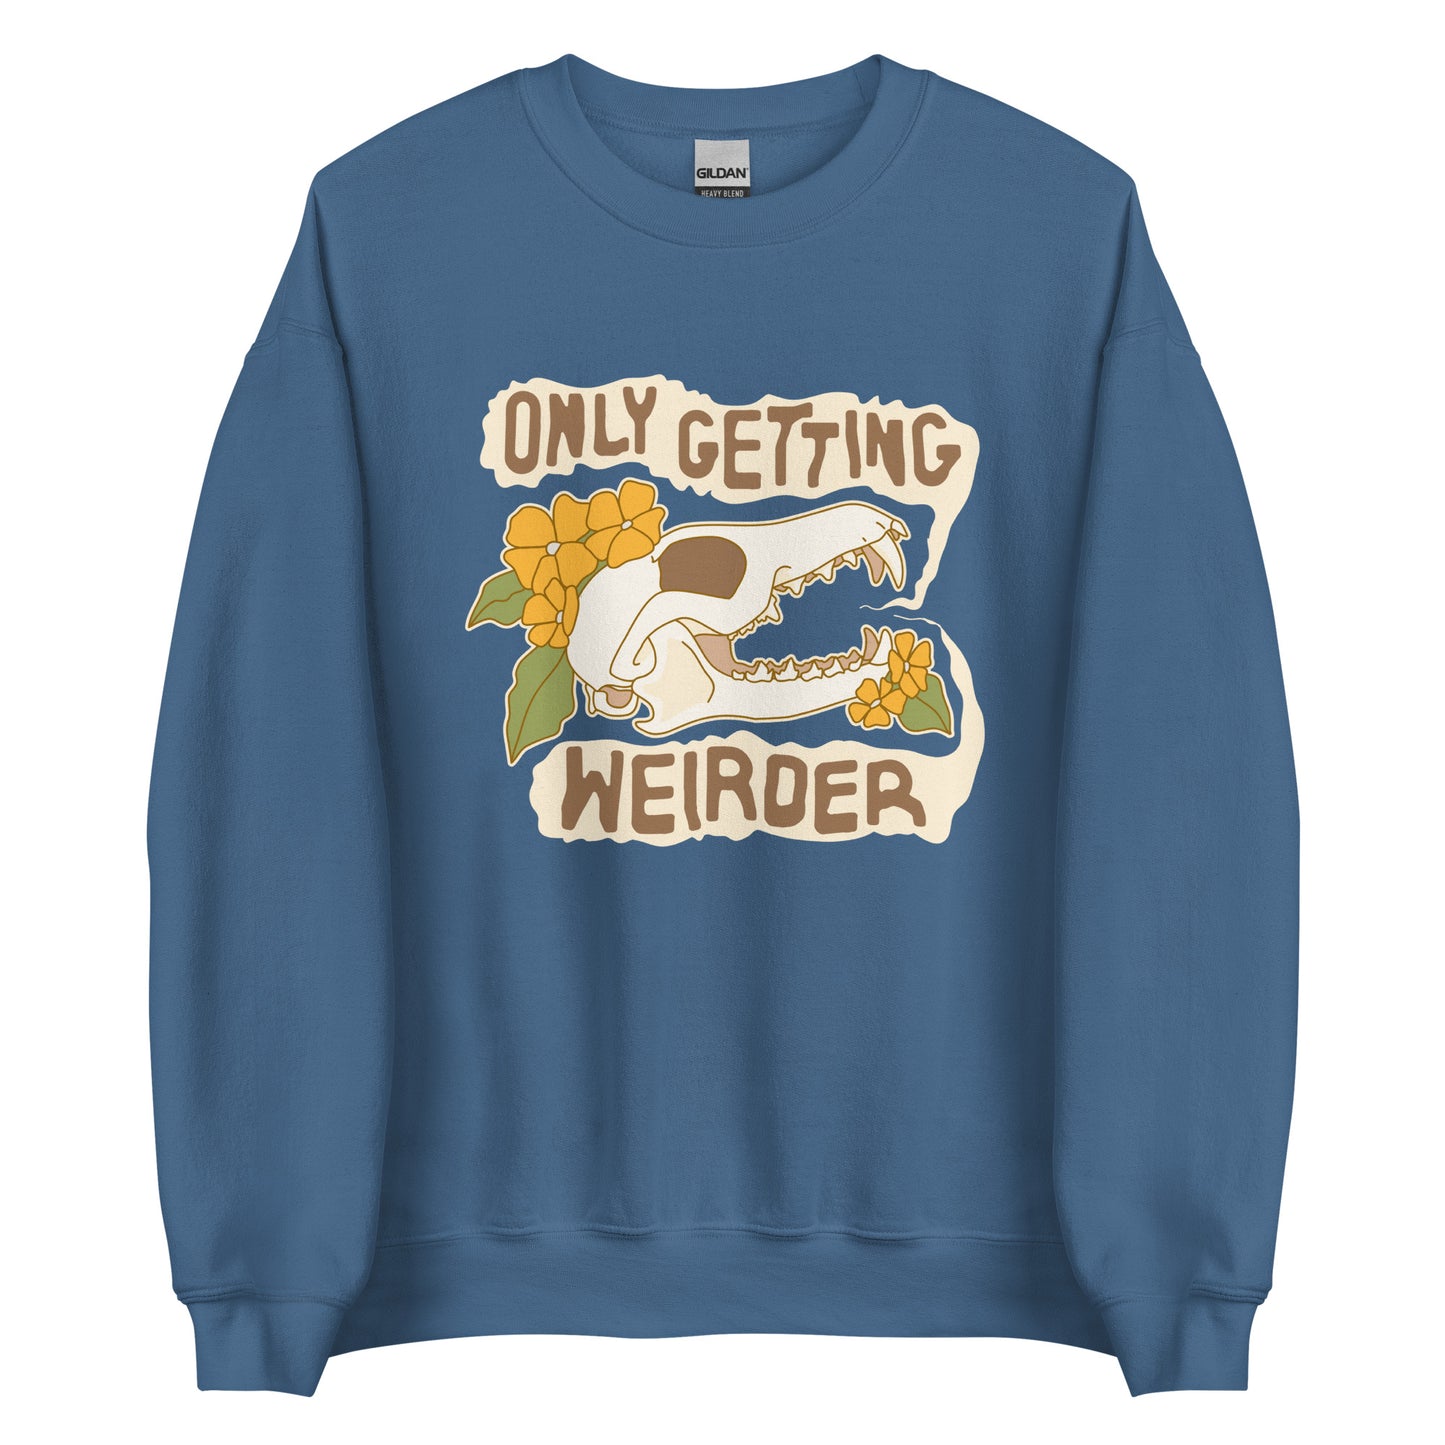 A blue crewneck sweatshirt featuring an illustration of a fox skull surrounded by yellow flowers. Wobbly speech bubbles are coming from the fox's mouth. The text inside the bubbles reads "ONLY GETTING WEIRDER".